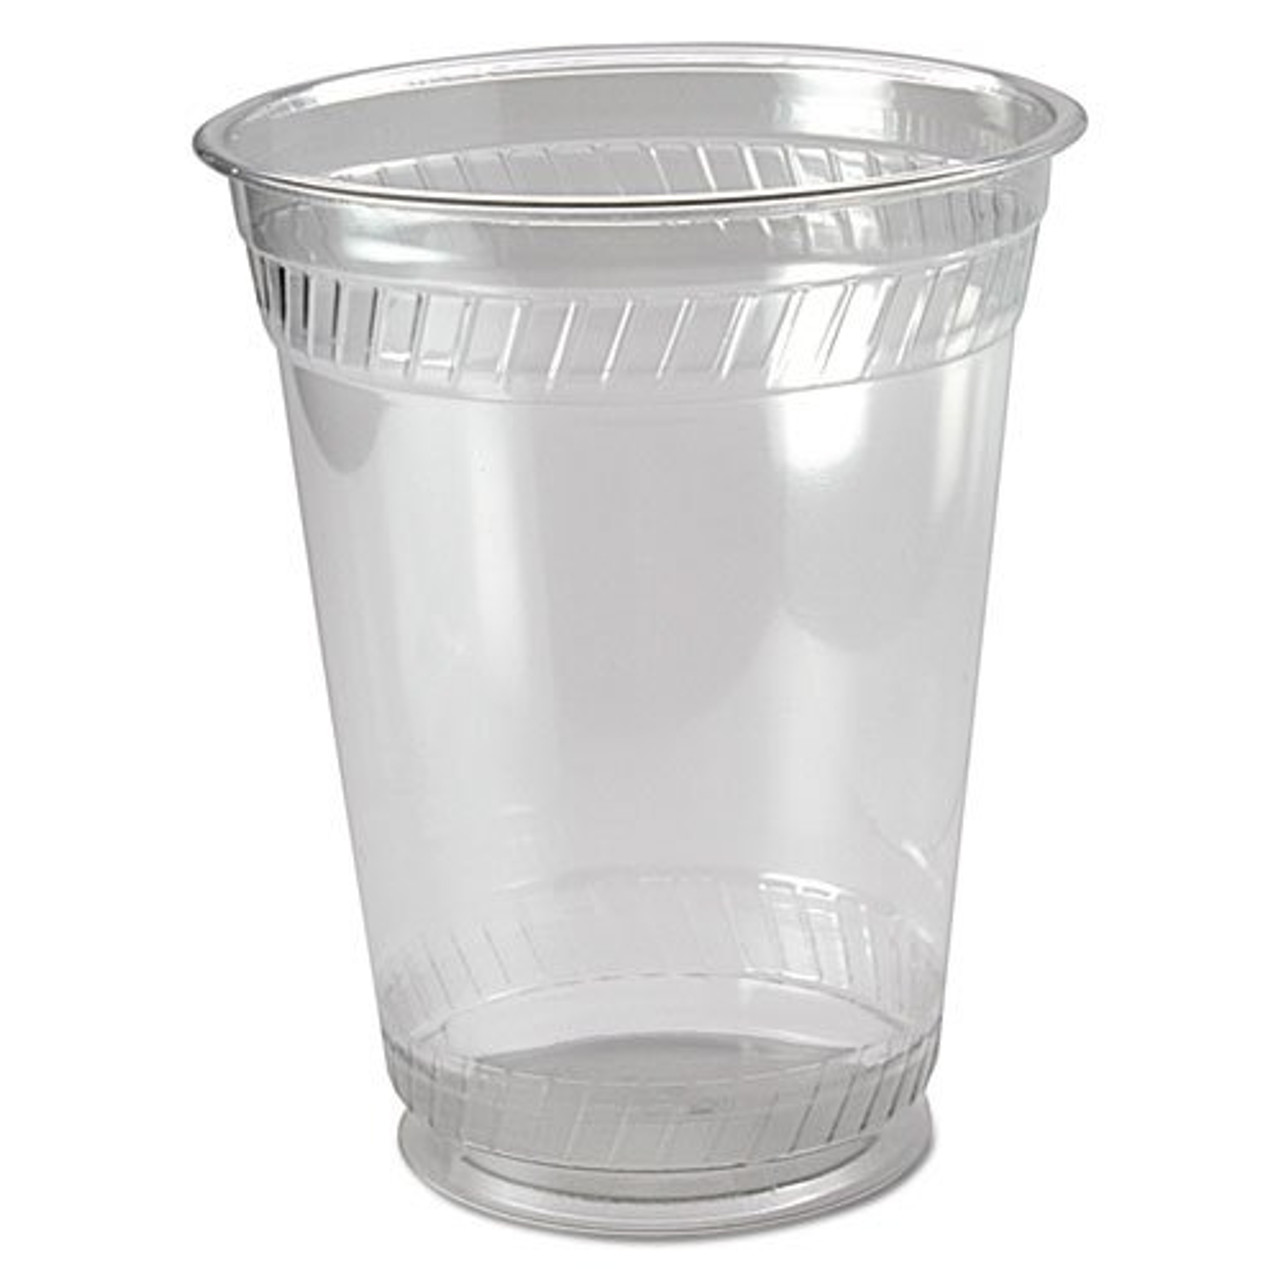 https://cdn11.bigcommerce.com/s-g3i86bef61/images/stencil/1280x1280/products/2869/3904/Fabri-Kal-9509106-Disposable-Clear-Cup__28491.1666713477.jpg?c=1